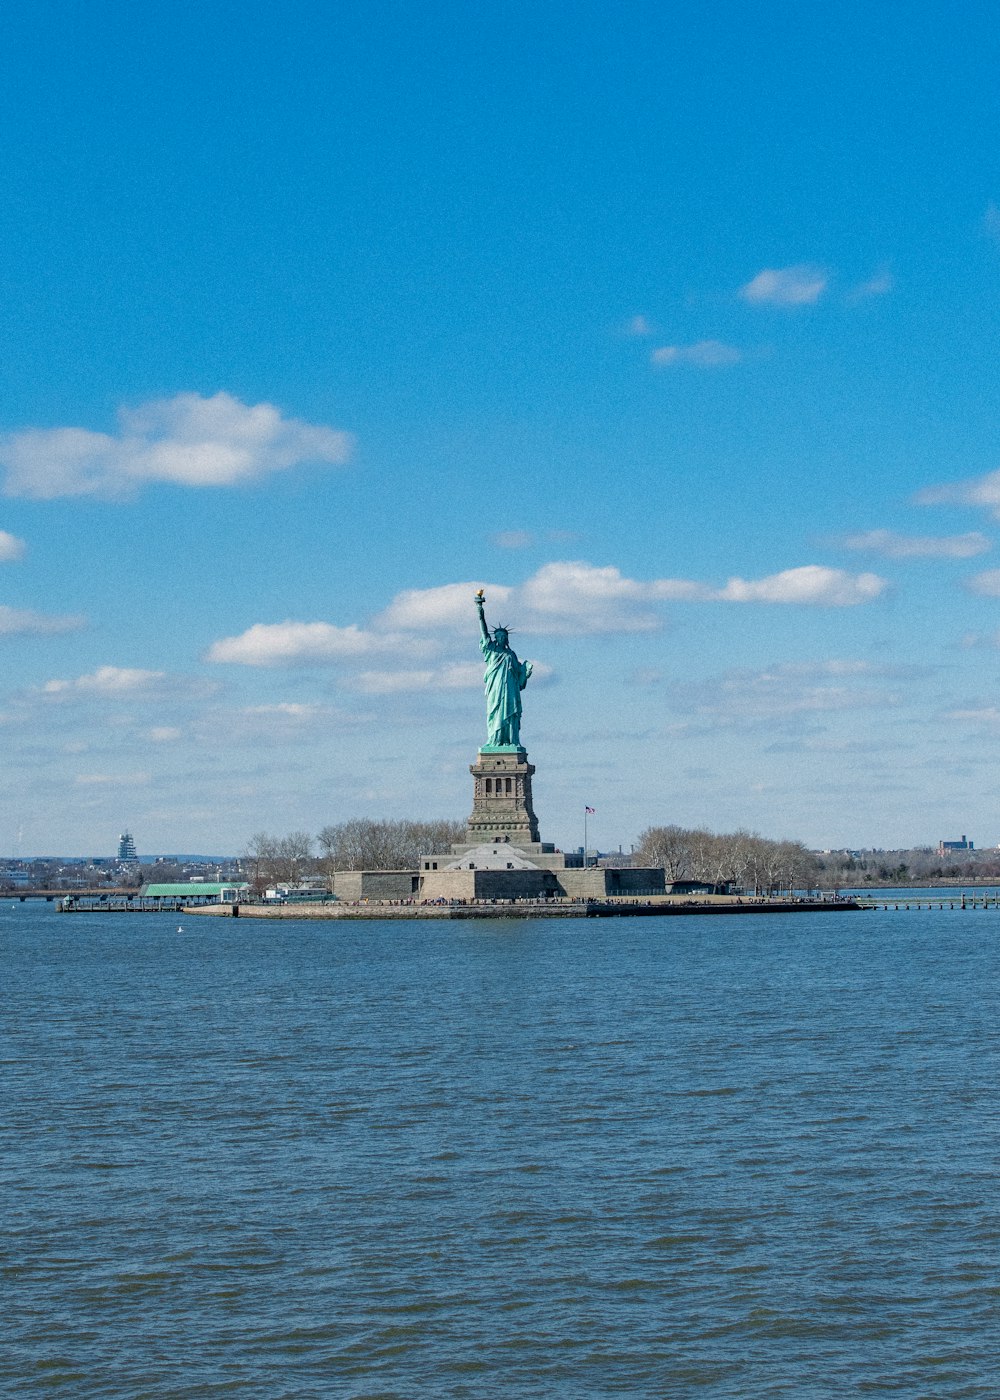 a large body of water with a statue of liberty in the background